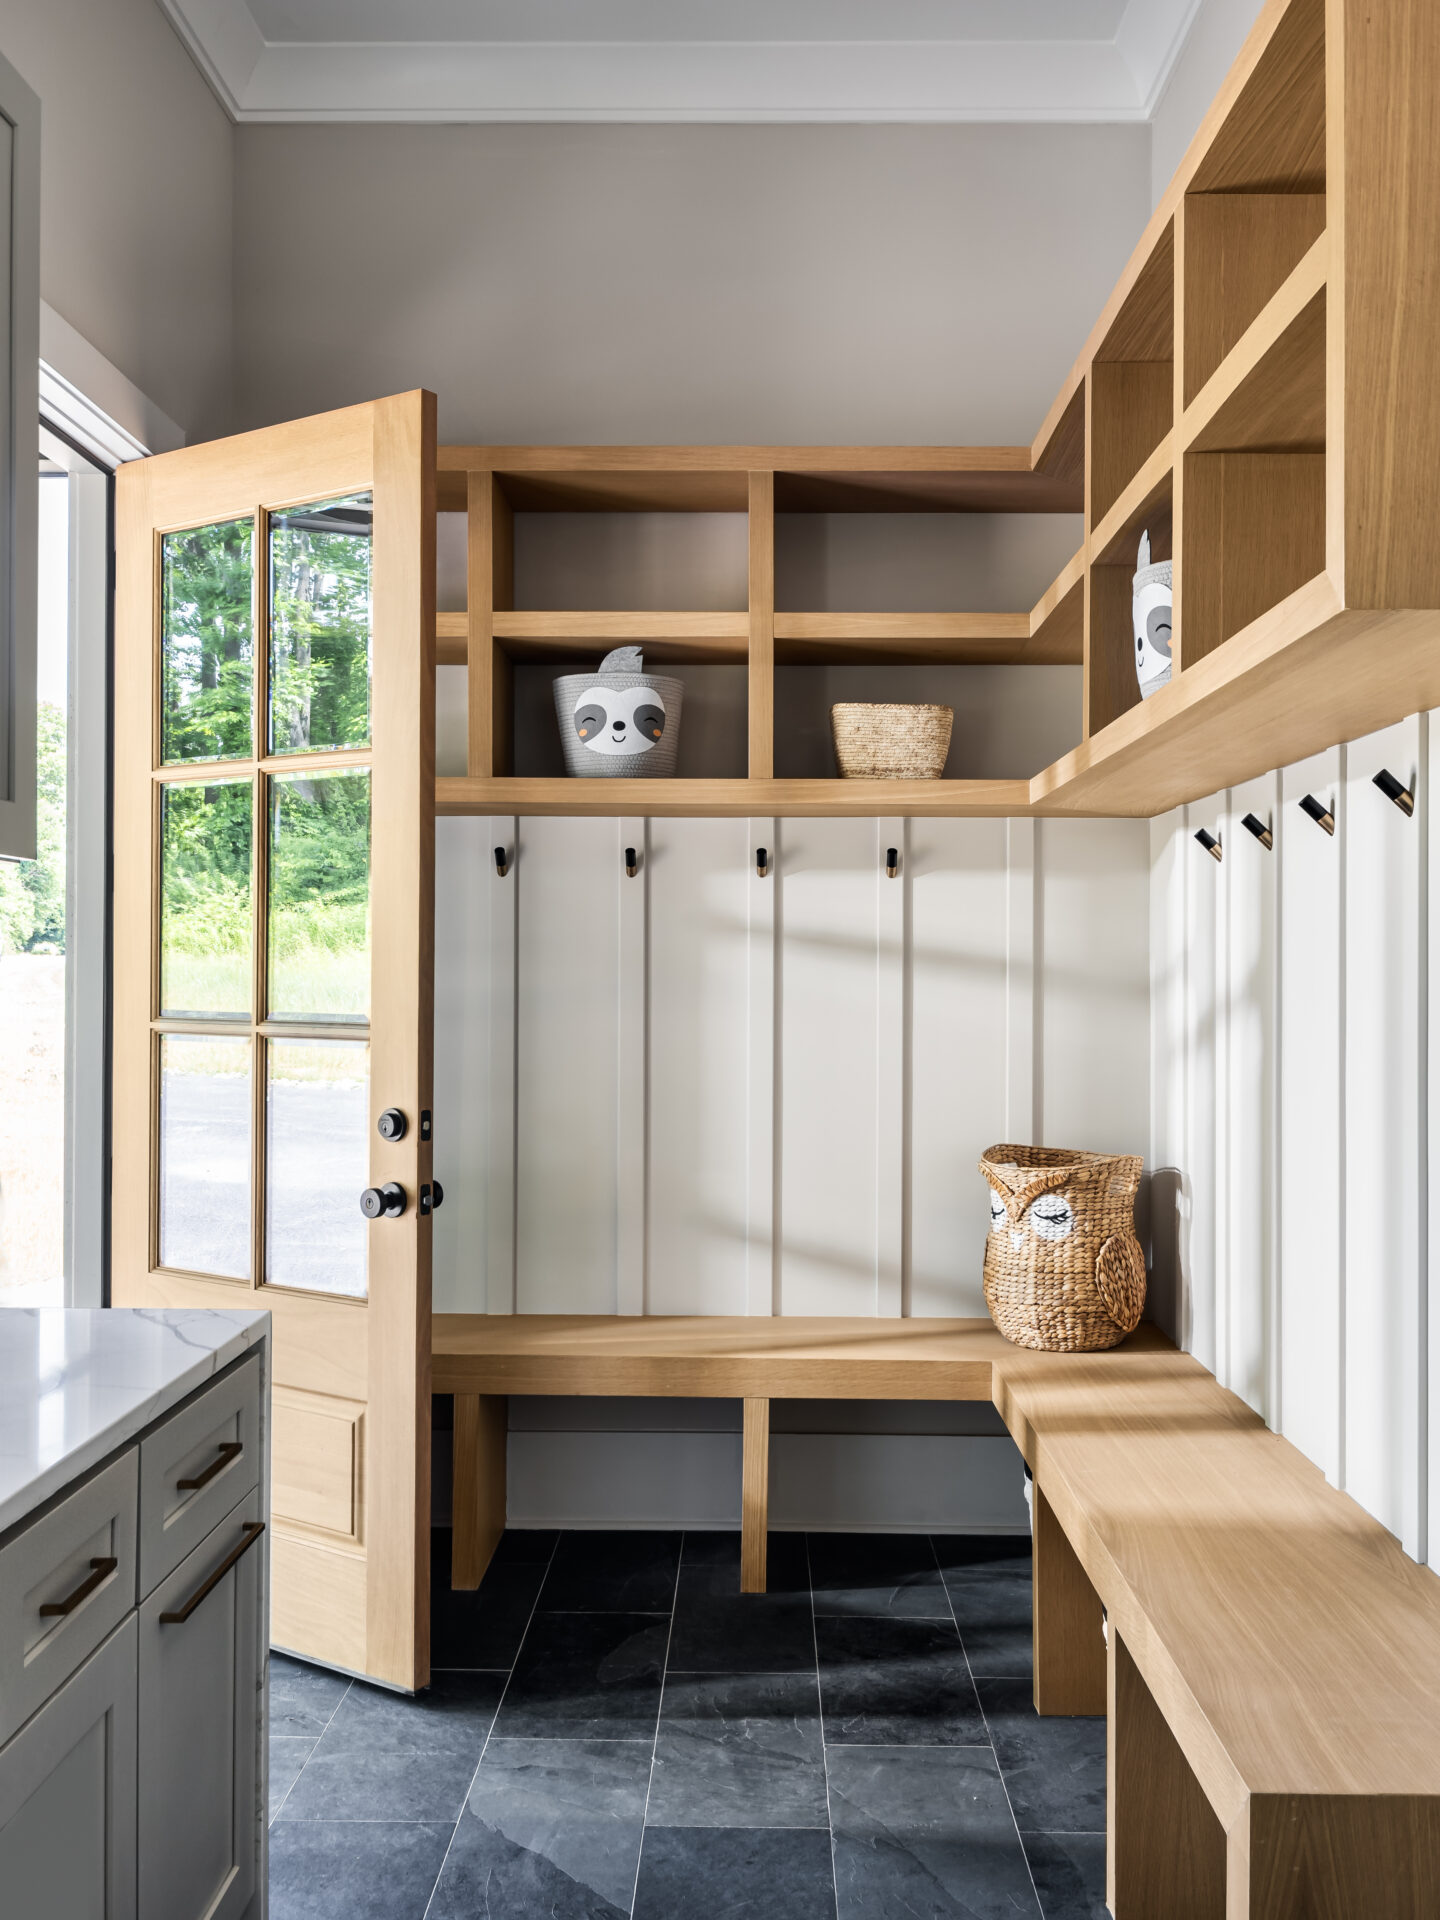 Custom Cabinetry & Woodshop By Innovative Building Services